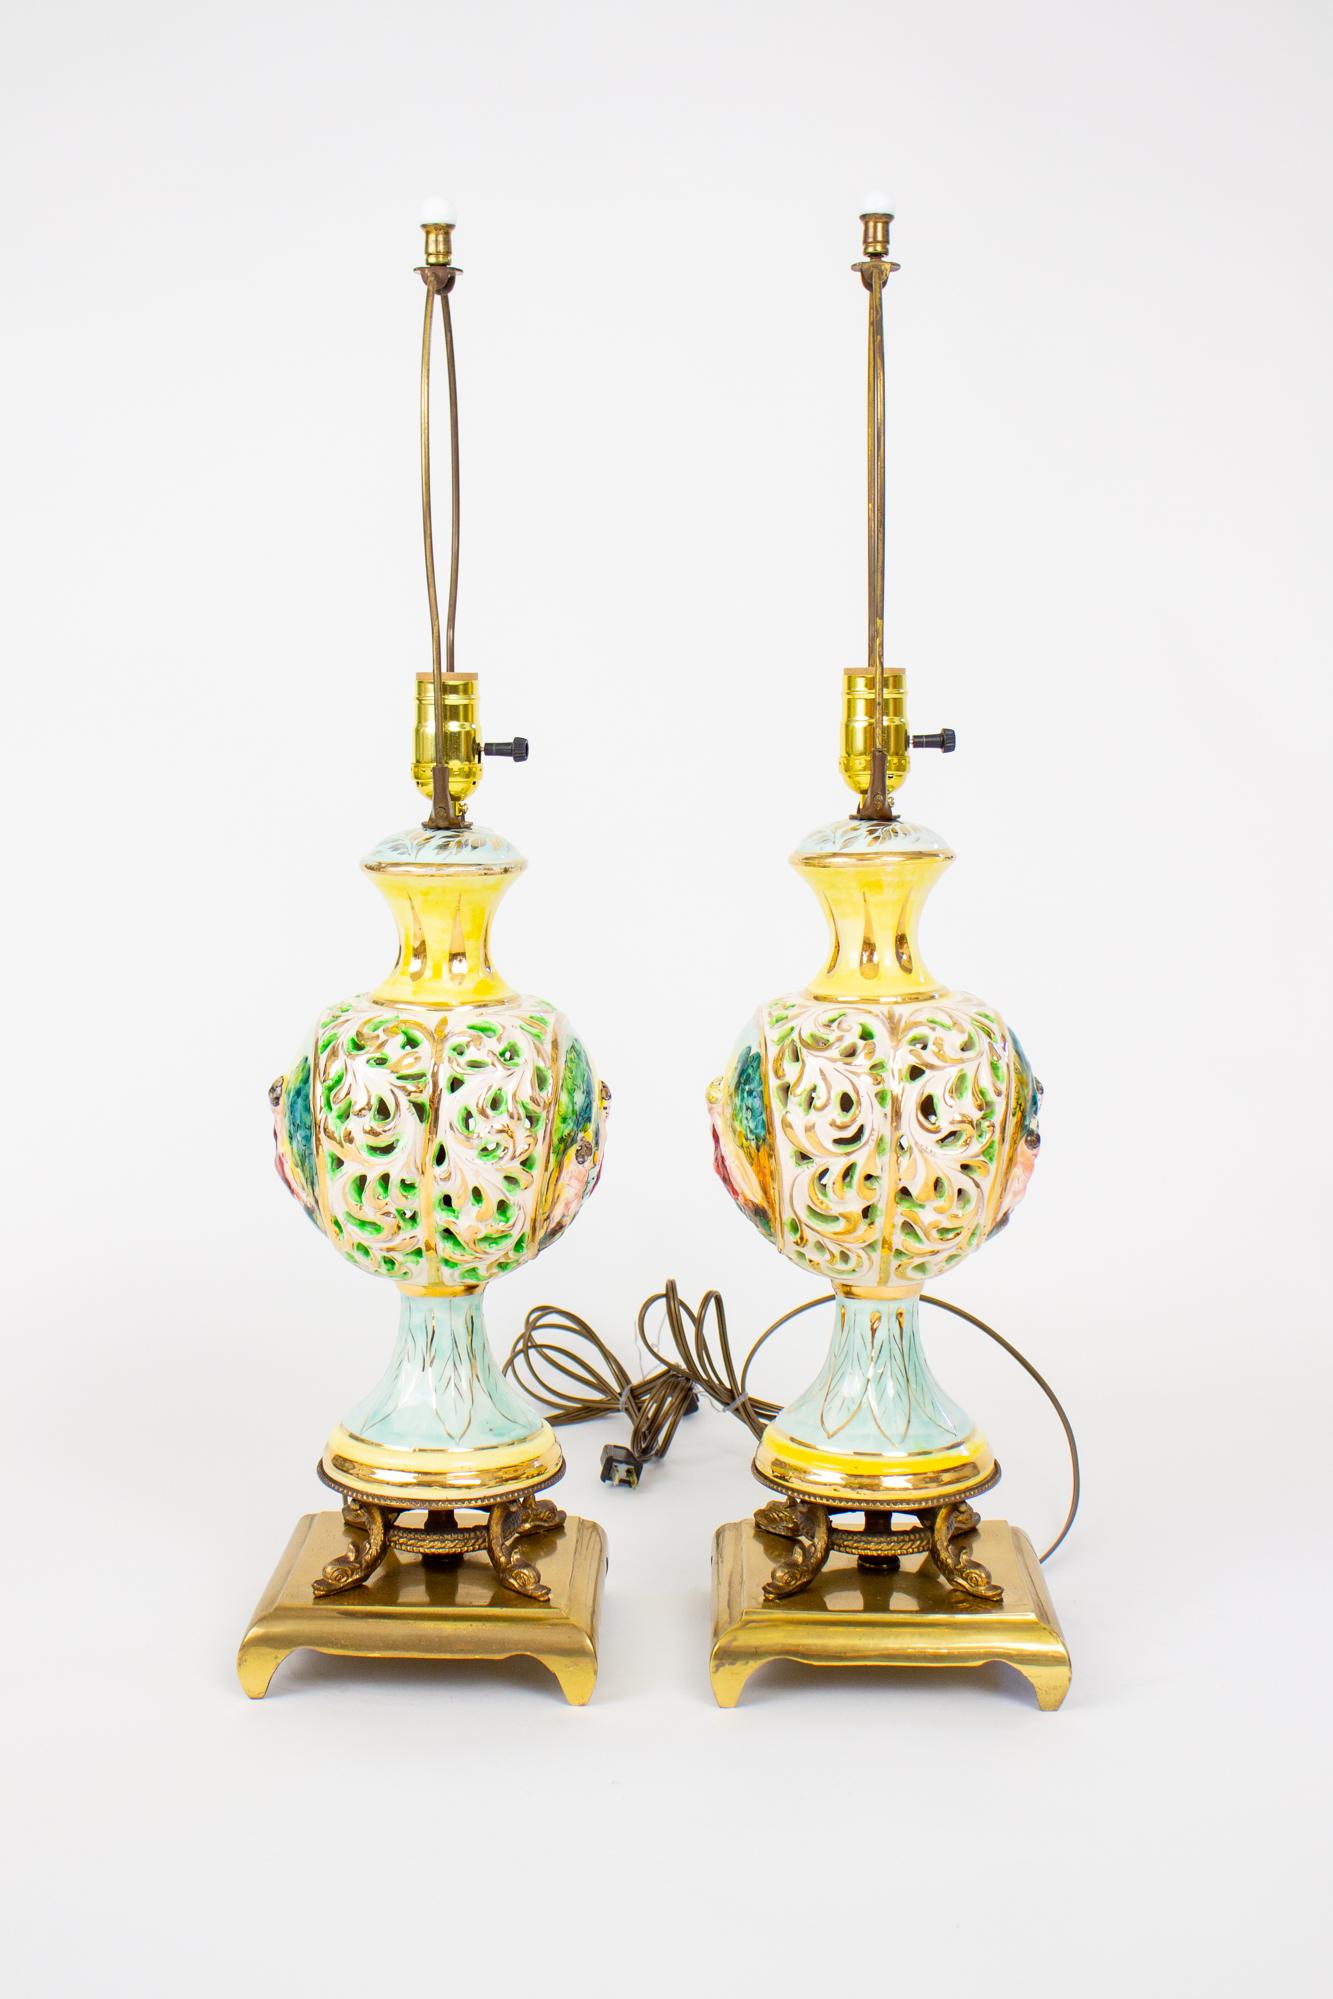 Mid 20th Century Capodimonte Yellow And Sky Blue Table Lamps - a Pair For Sale 1